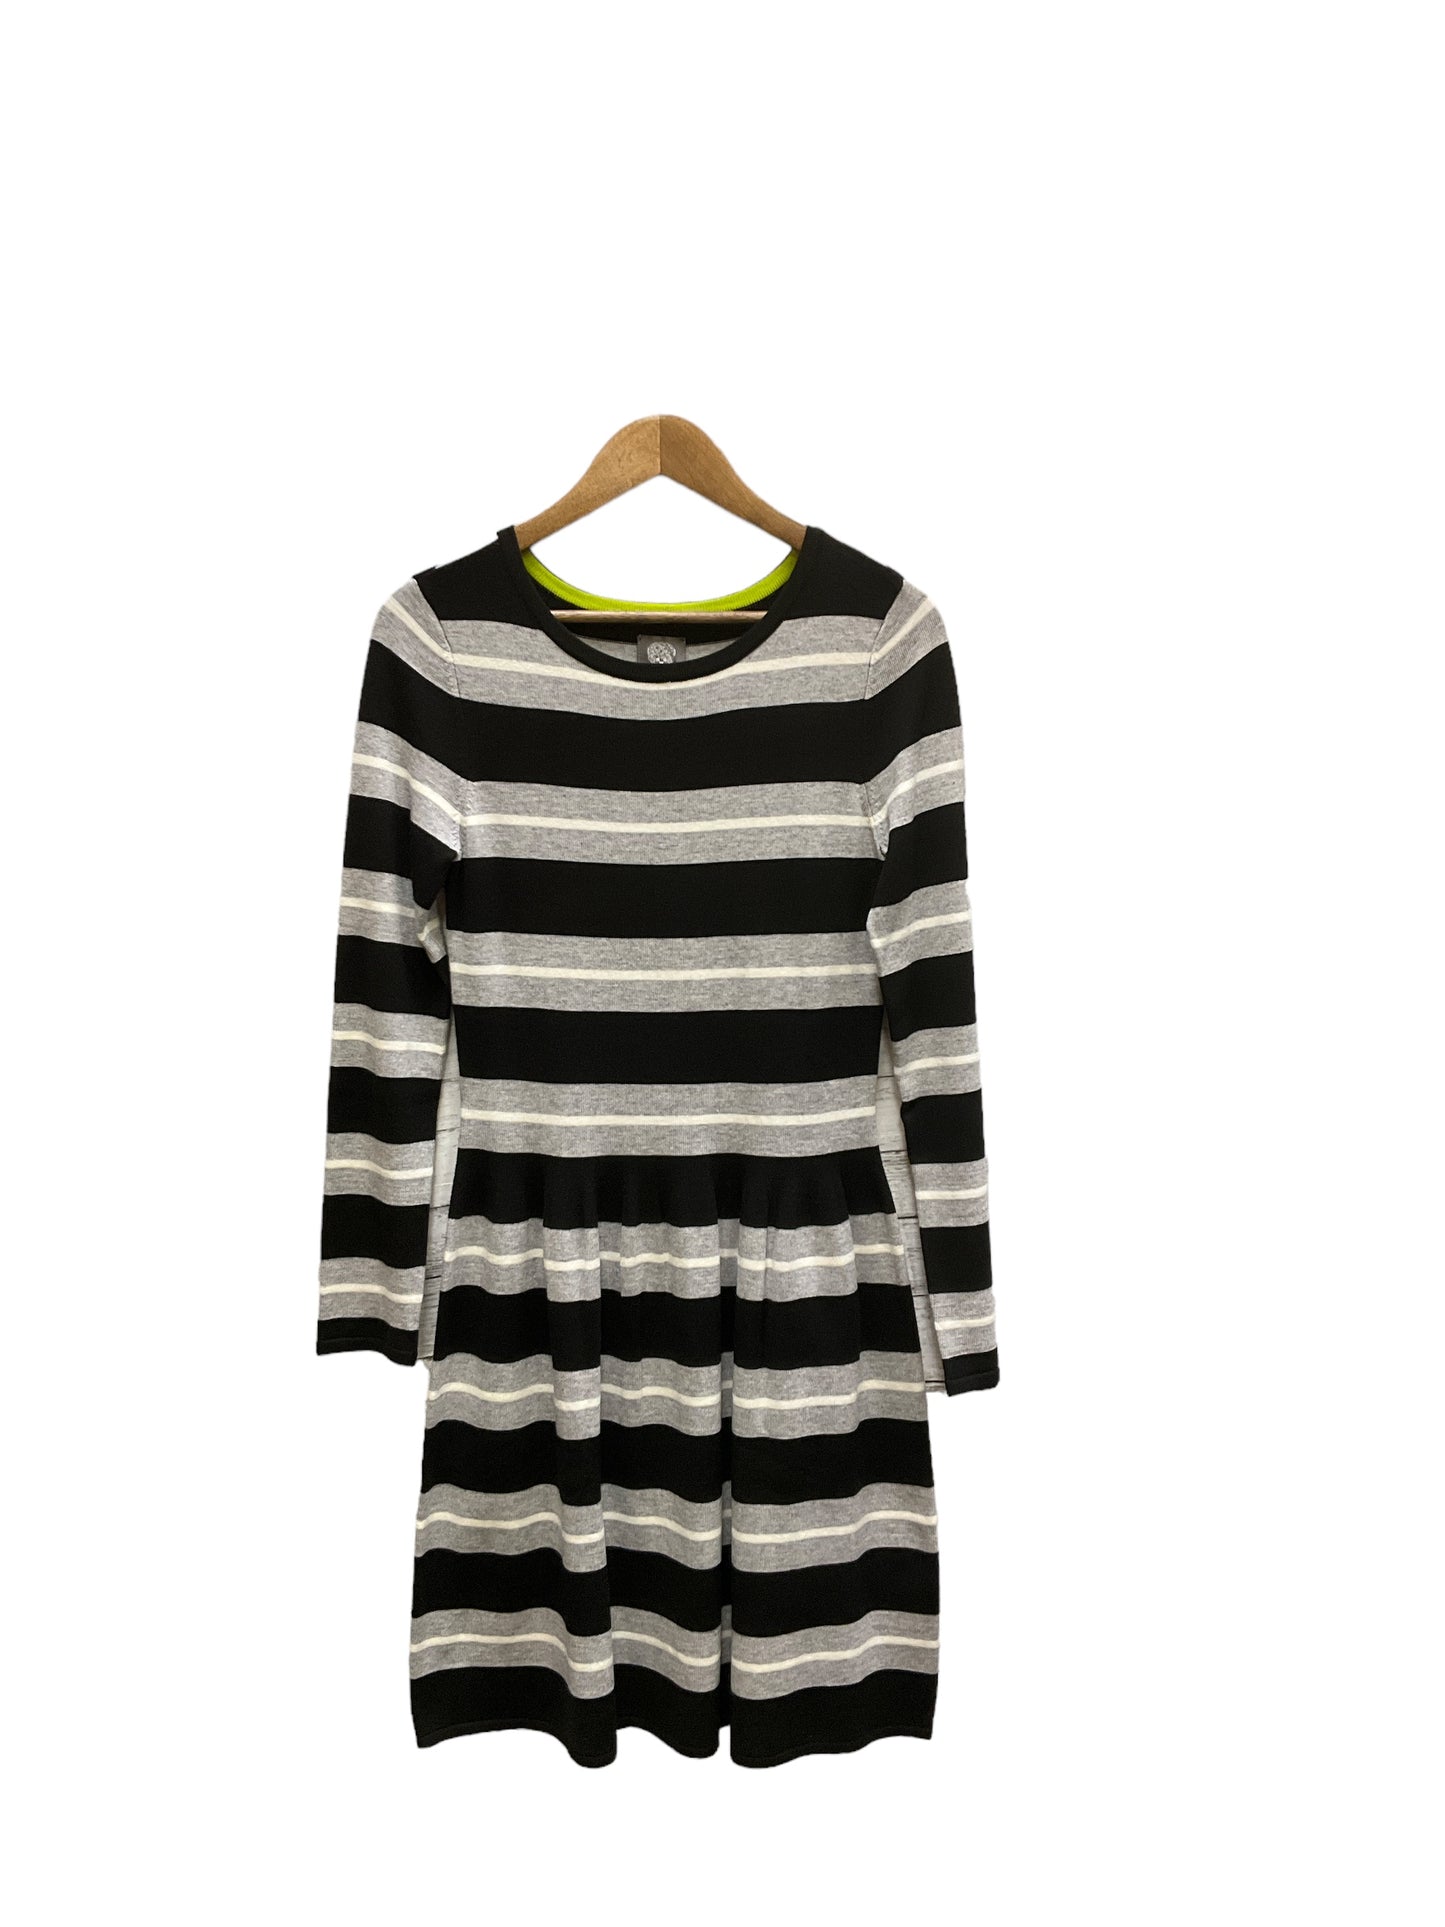 Dress Sweater By Vince Camuto  Size: S